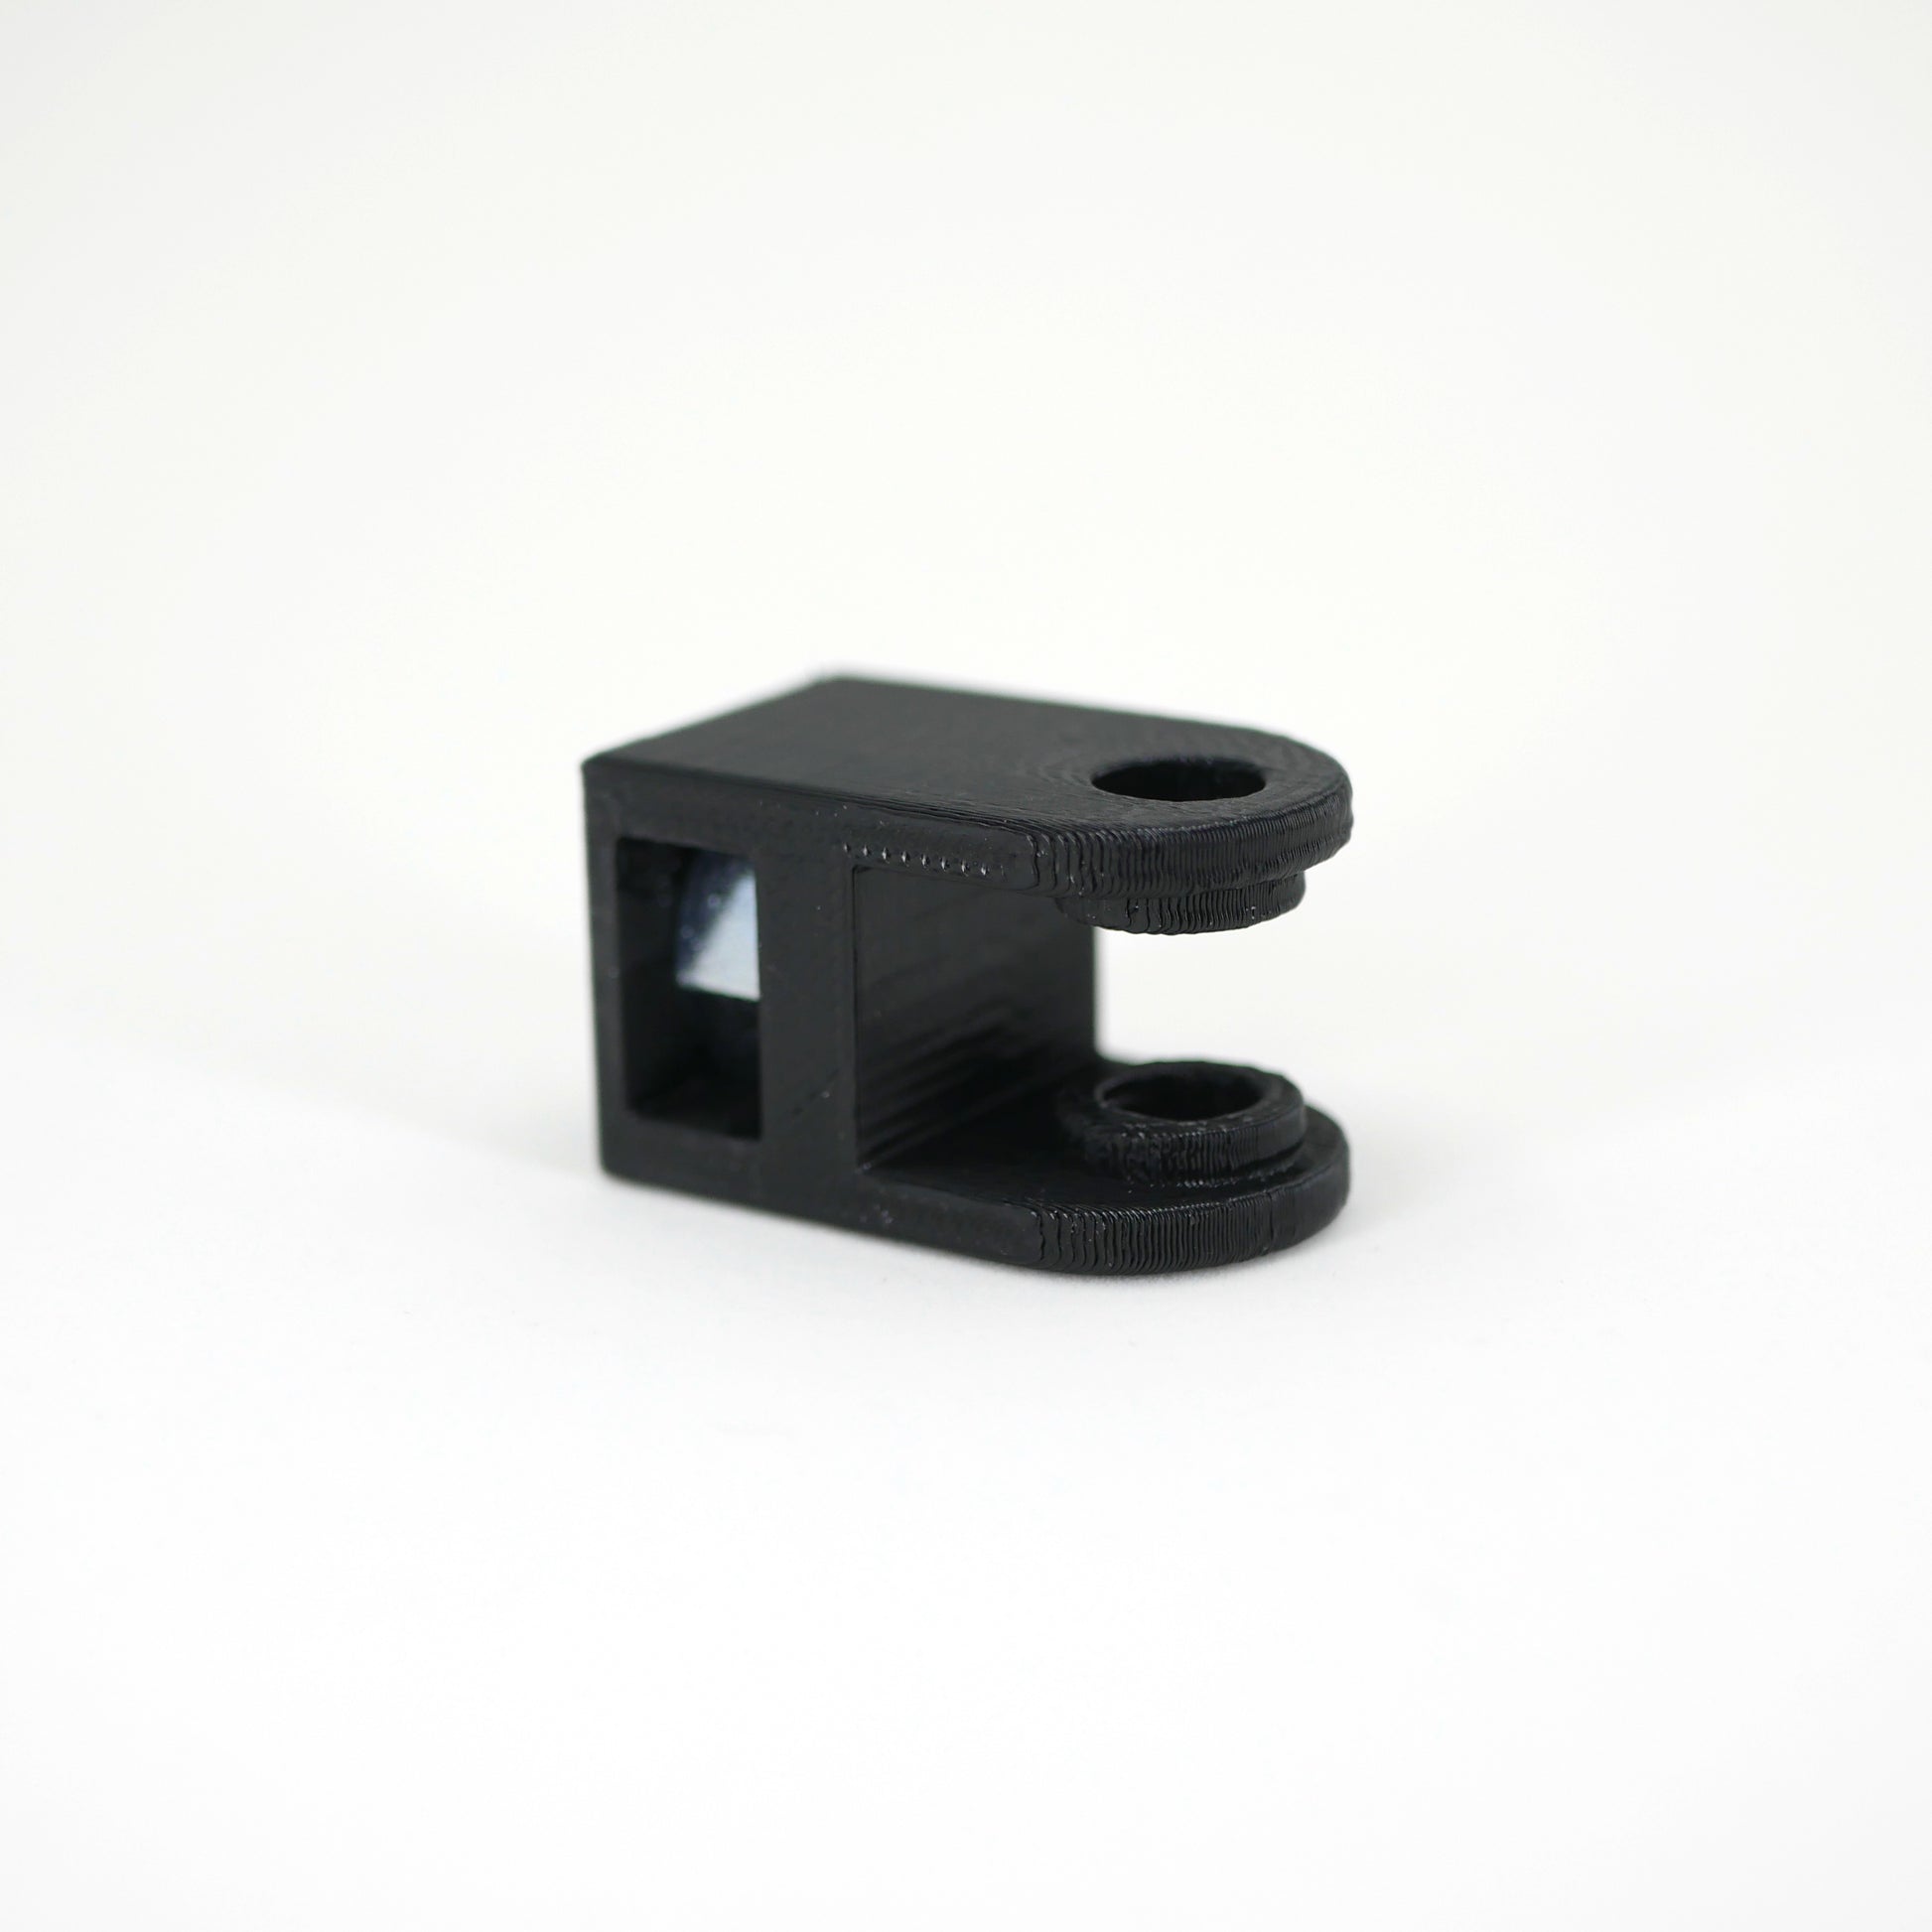 The front of a black HyperX DuoCast microphone mount adapter.